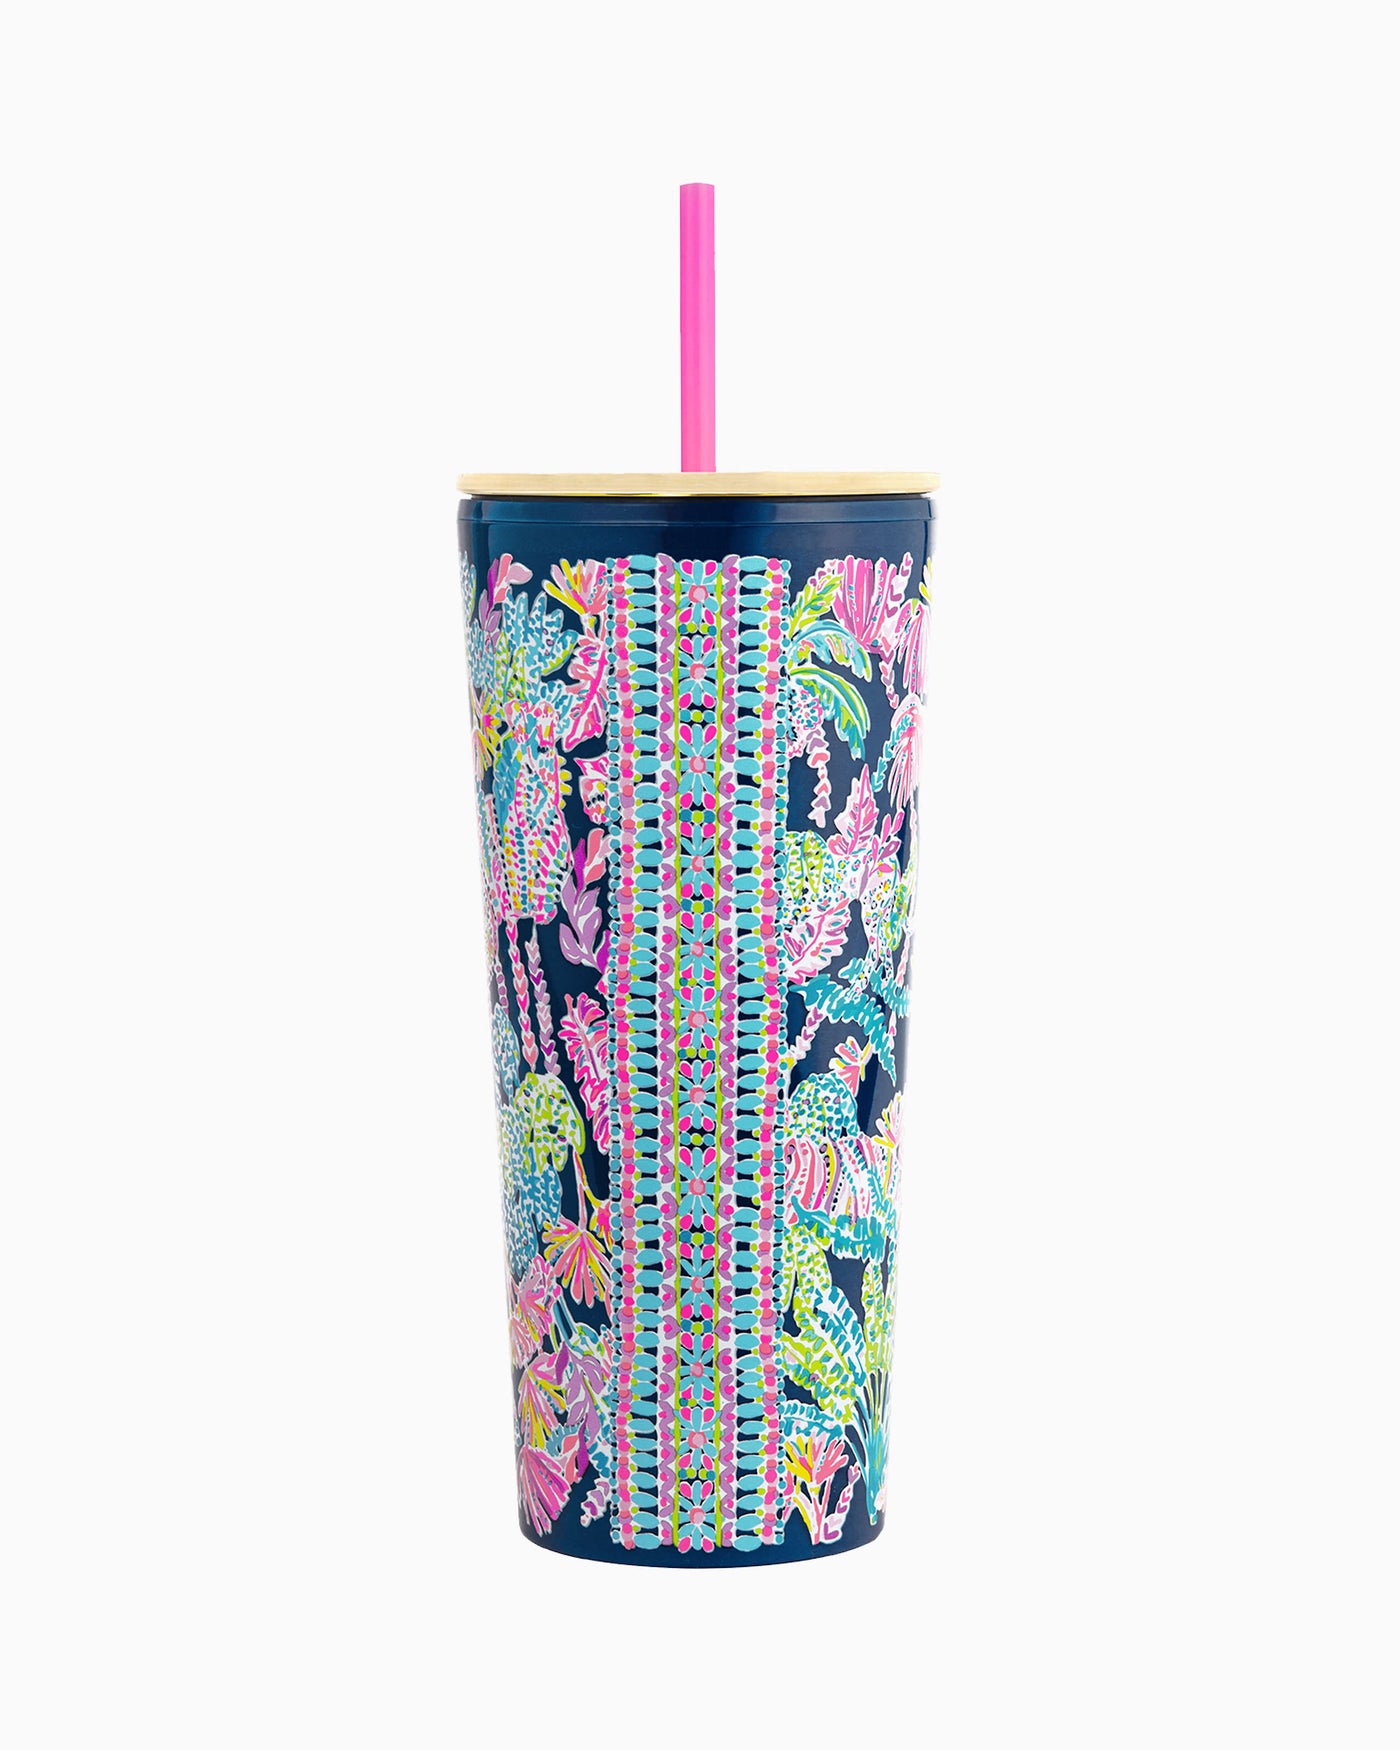 Seen and Heard Tumbler Lilly Pulitzer